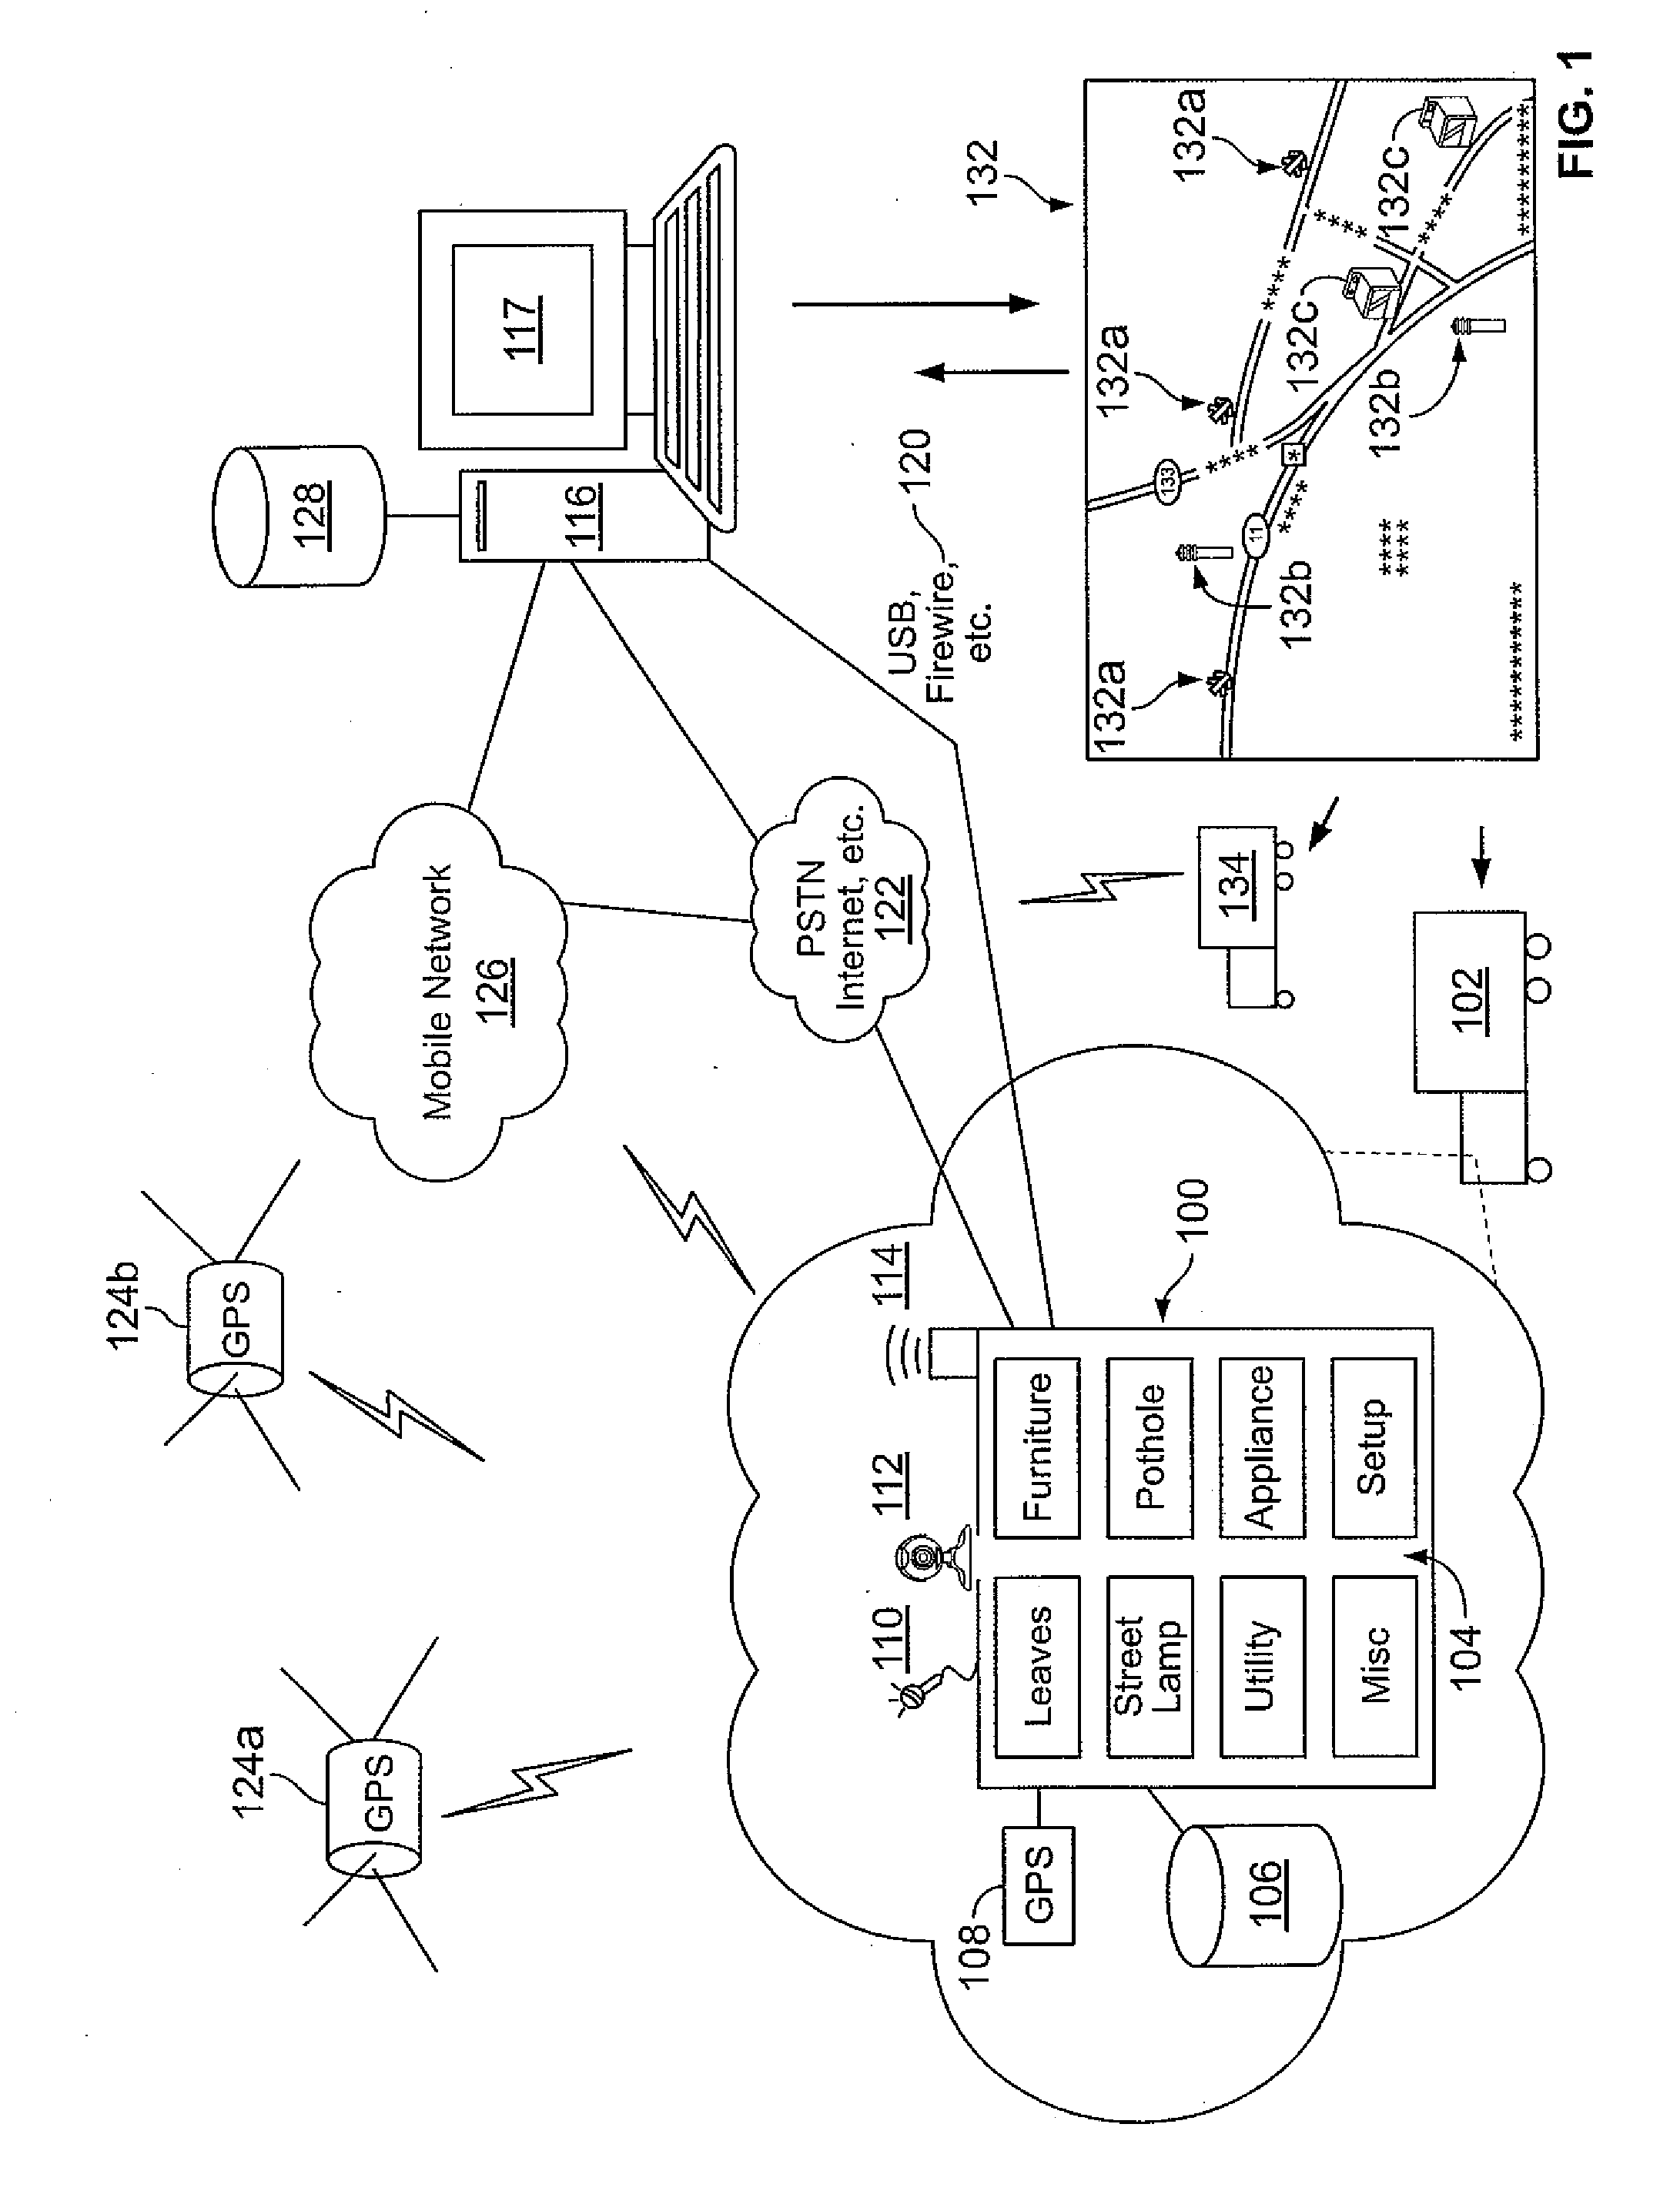 System and method for providing identification and location information of certain items